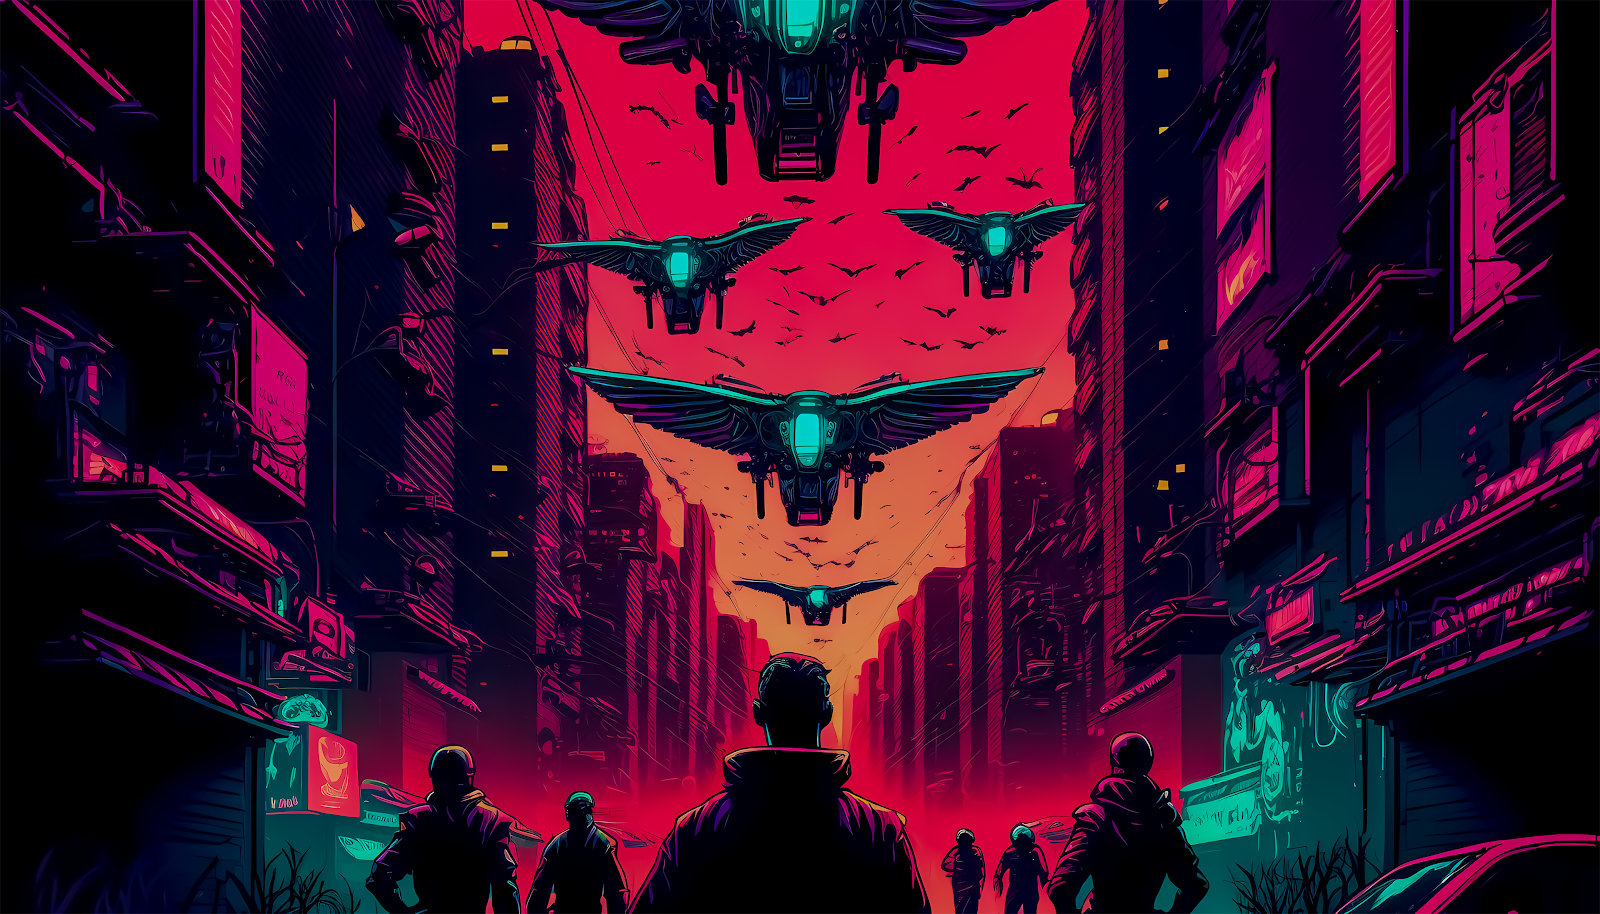 Cyberpunk wallpaper generated by Midjourney AI : r/wallpapers